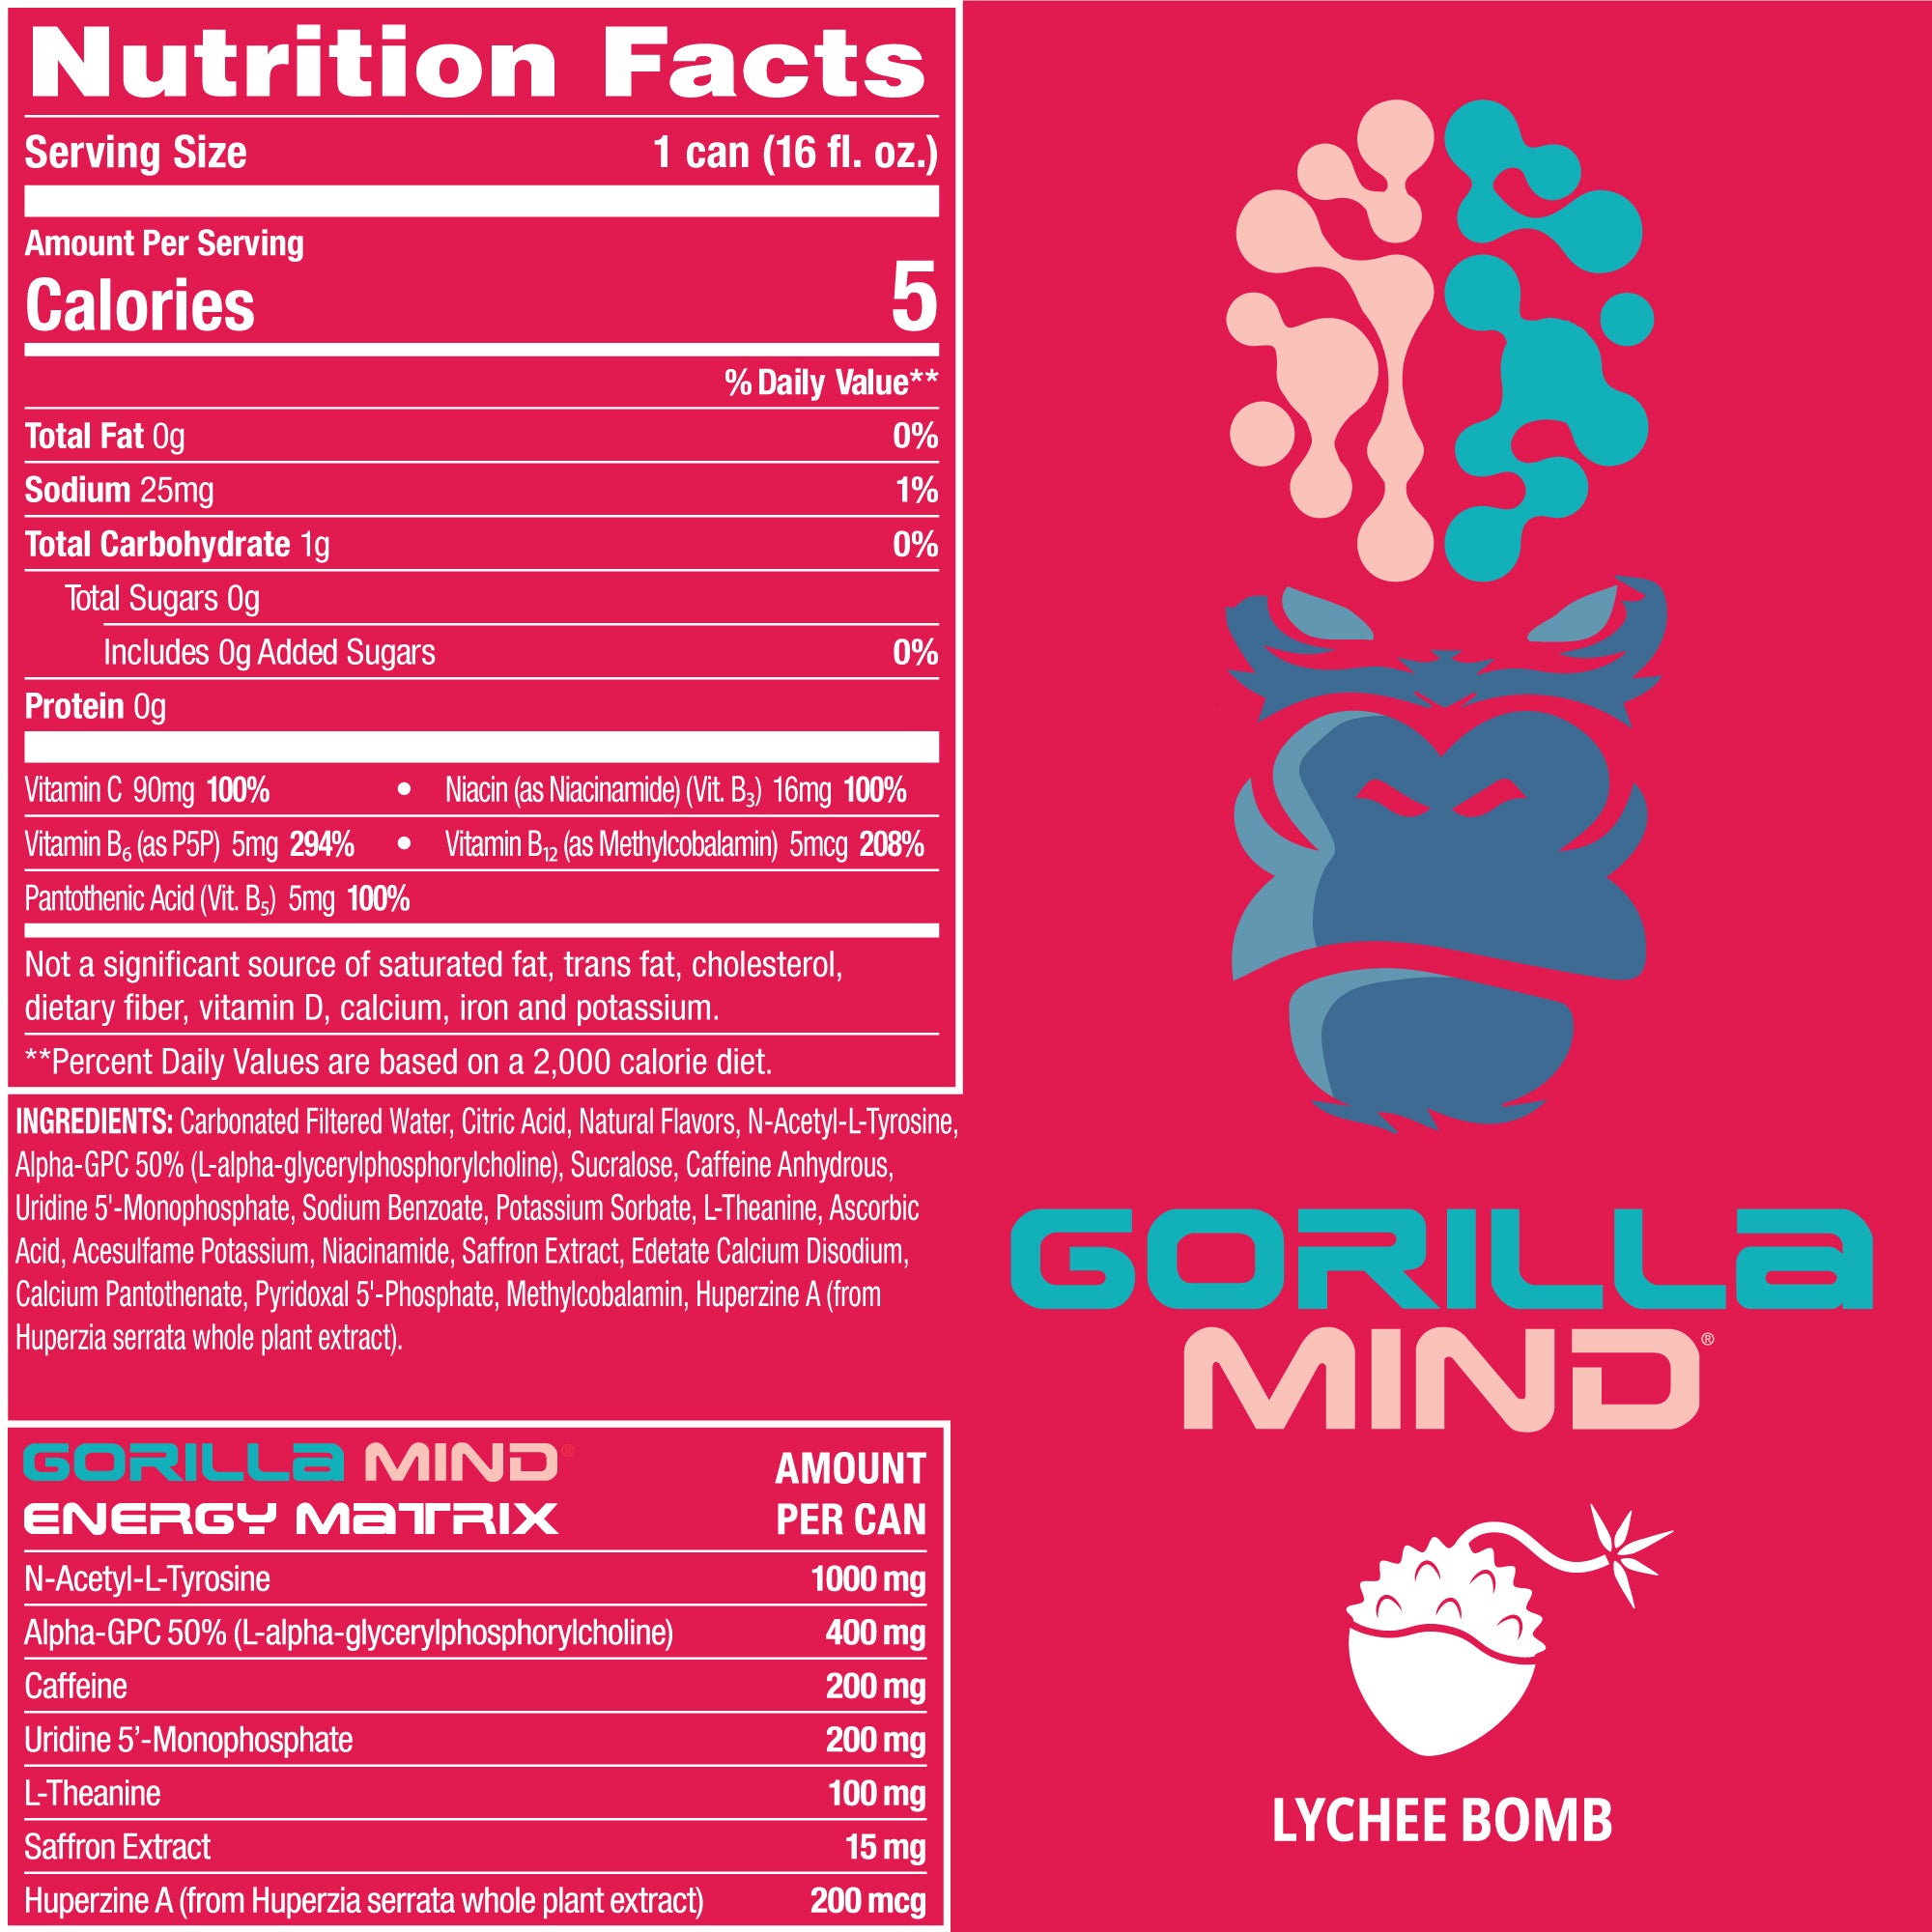 Lychee Bomb Nutrition Facts